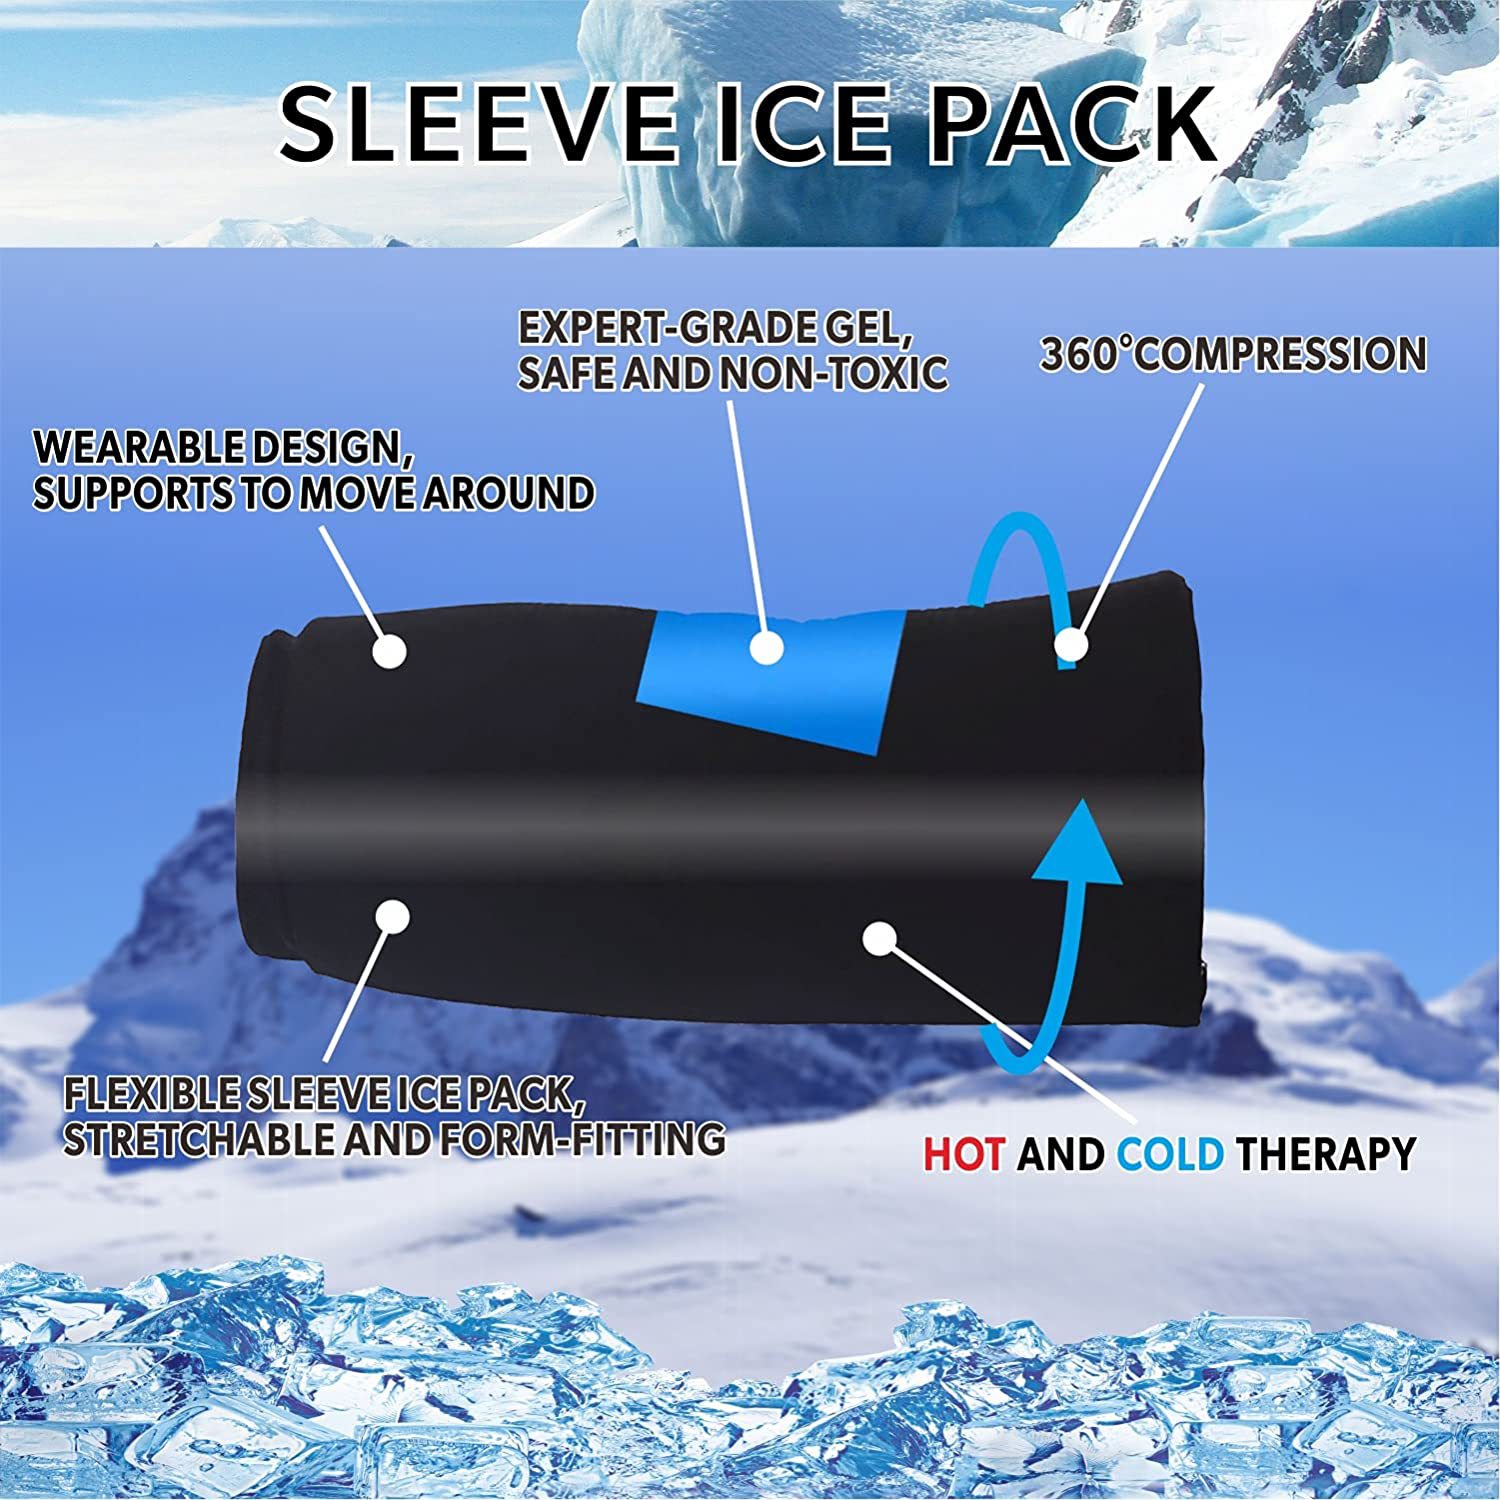 Elbow Gel Cold Compress Sports Knee Pad Knee Injury Hot And Cold Therapy Ice Pack Wrist Protector Sports Running Sheath